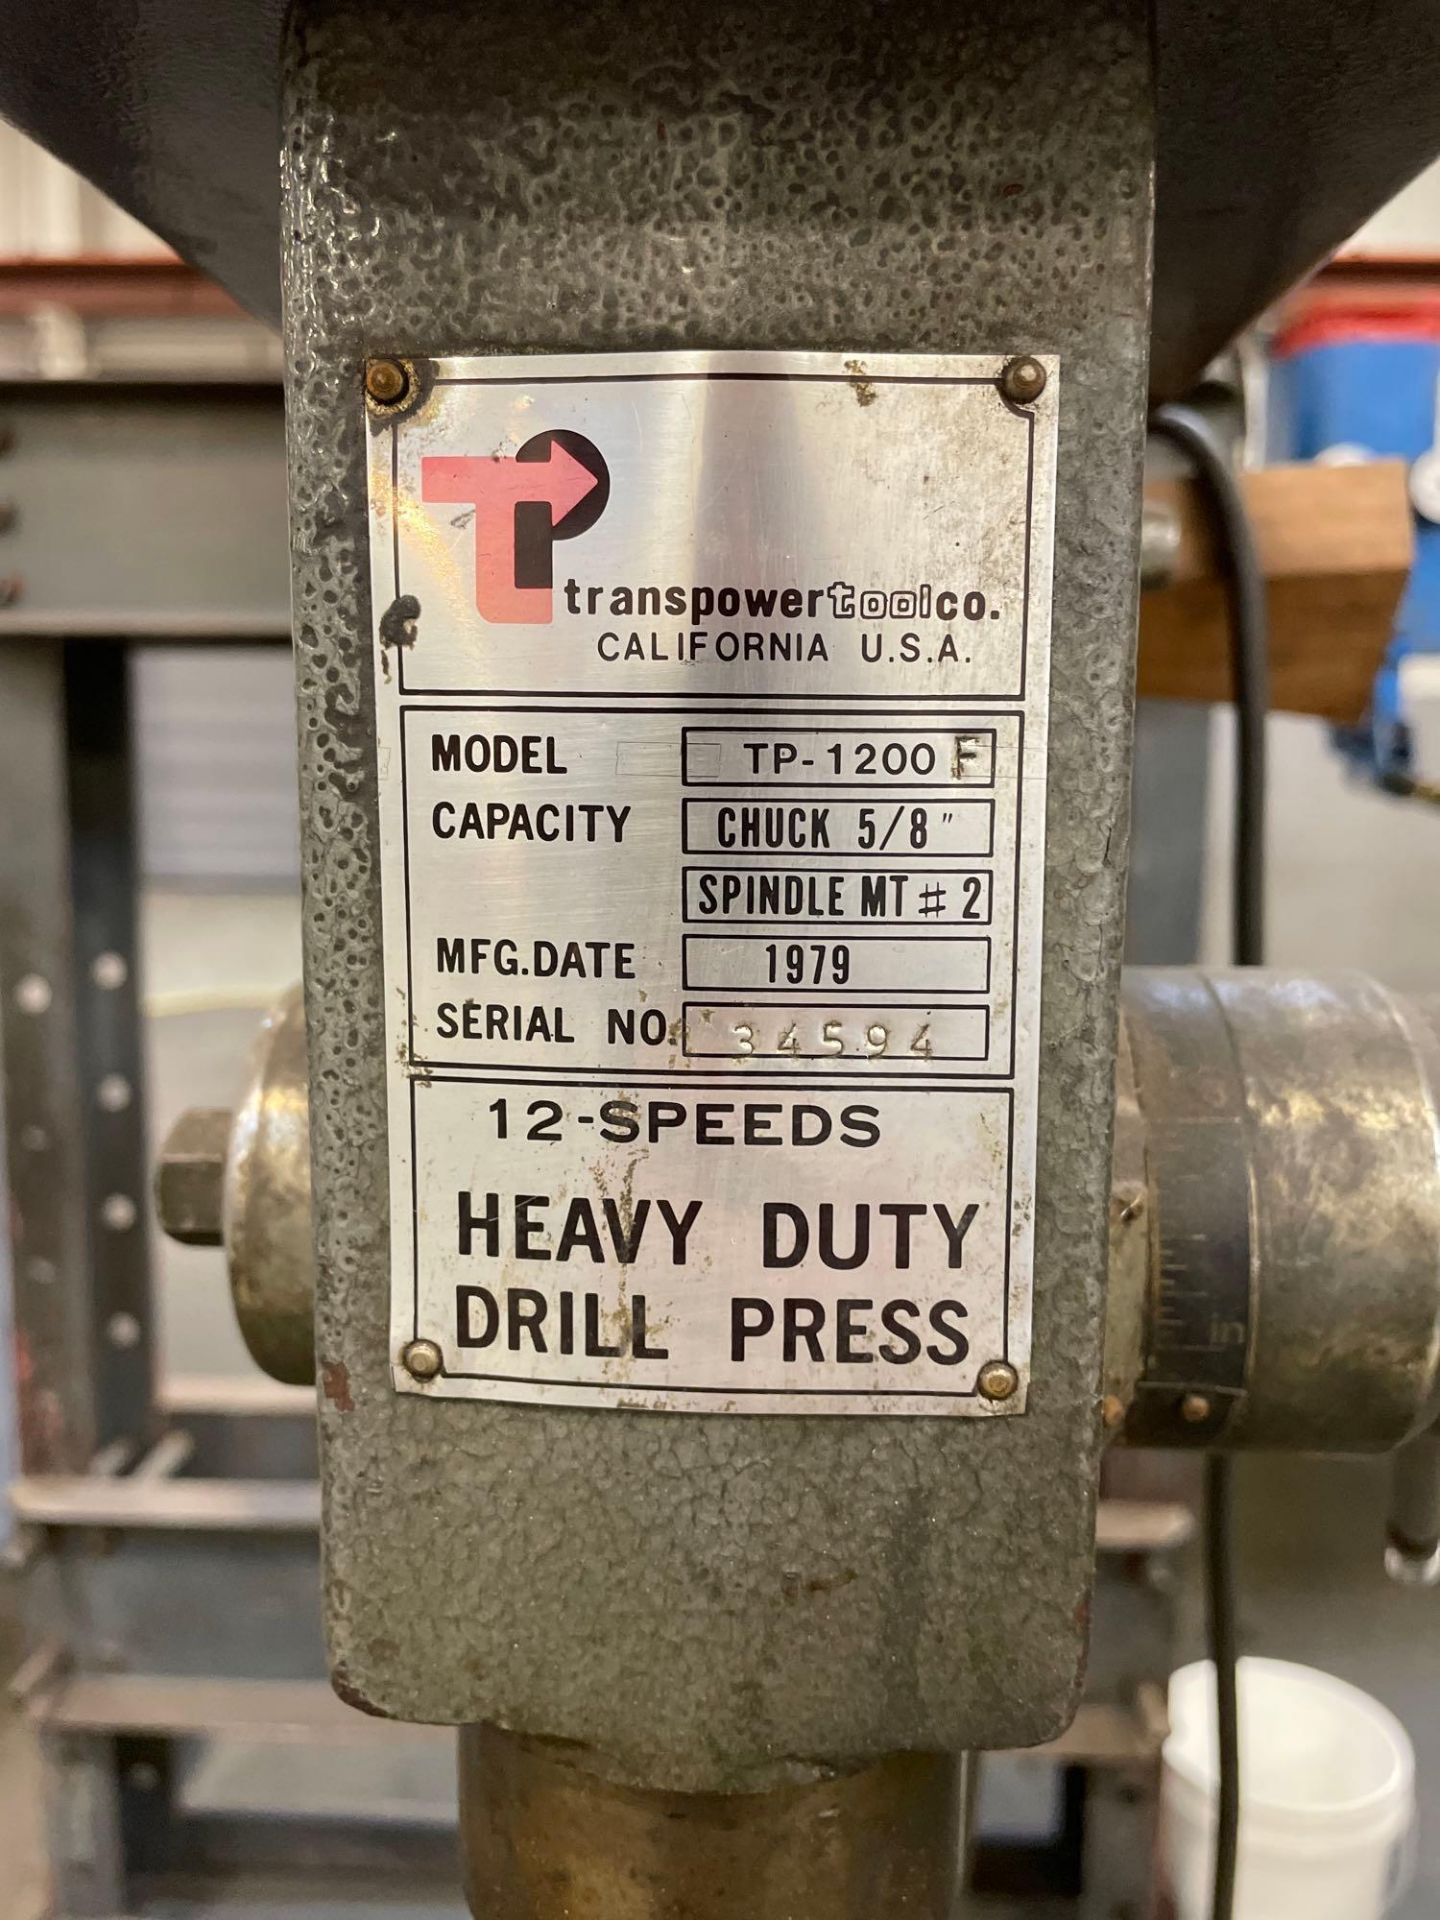 Transpower Tool Co. Heavy Duty Drill Press, Model TP-1200F - Image 3 of 7